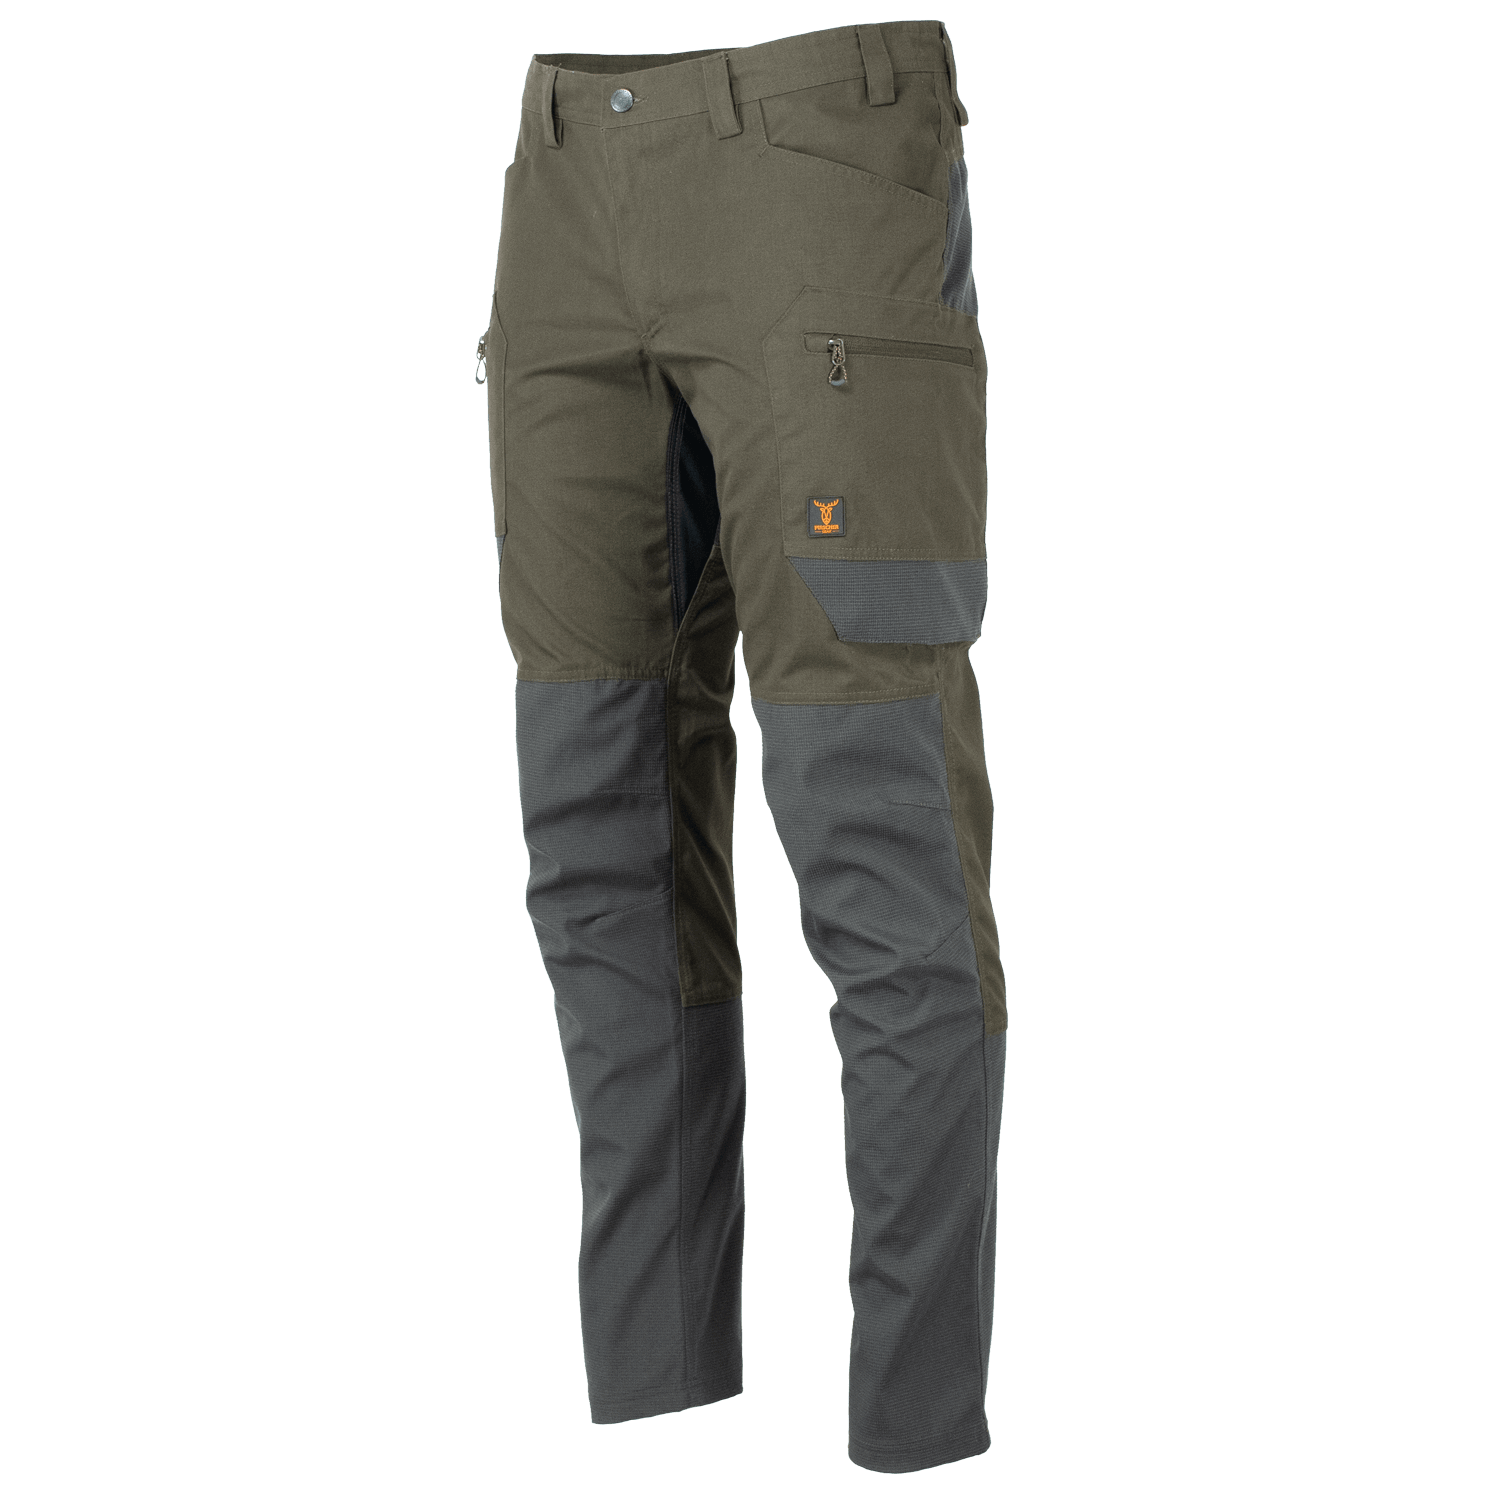 Pirscher Gear Rugged Hybrid Pants - Hunting Trousers